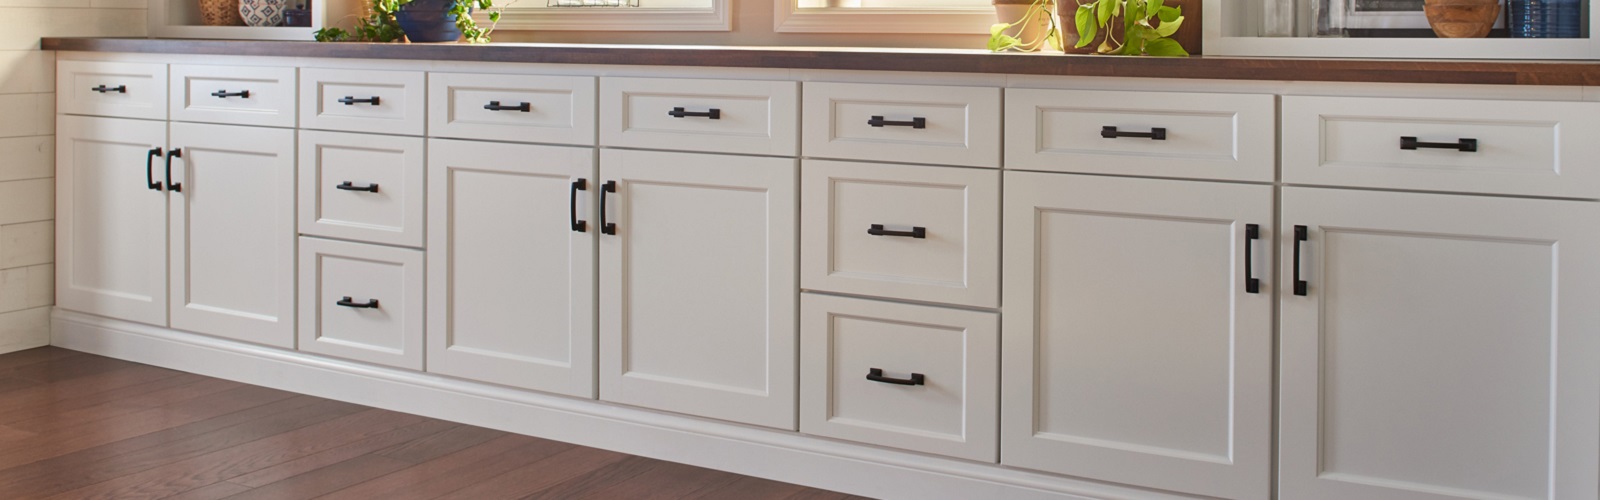 7 Basic Design Considerations For Selecting Cabinet Pulls And Knobs For  Your Interior Design Project — DESIGNED